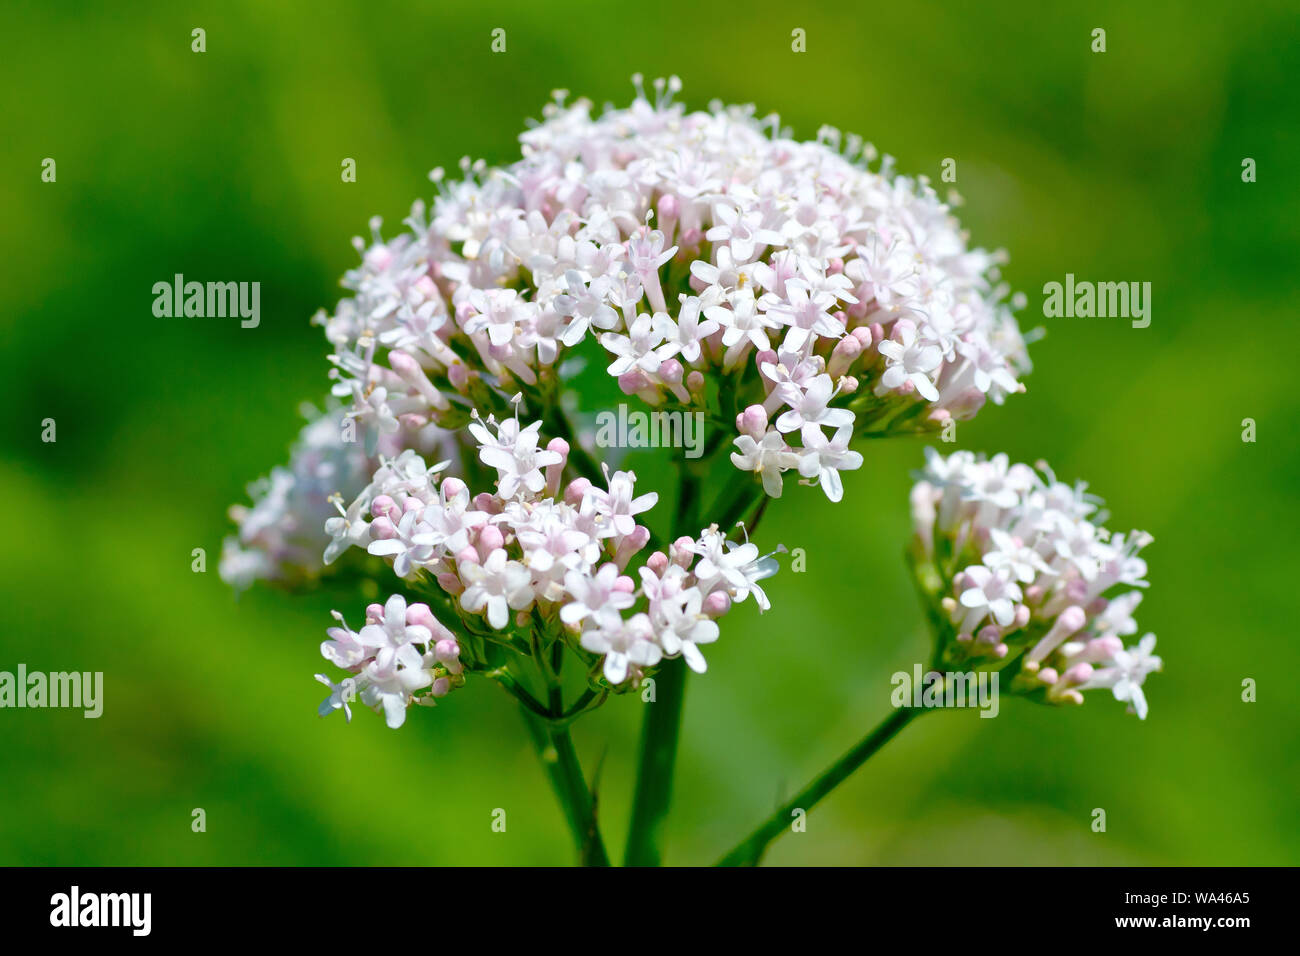 Common Valerian (valeriana officinalis), close up showing the individual flowers of the flower head. Stock Photo